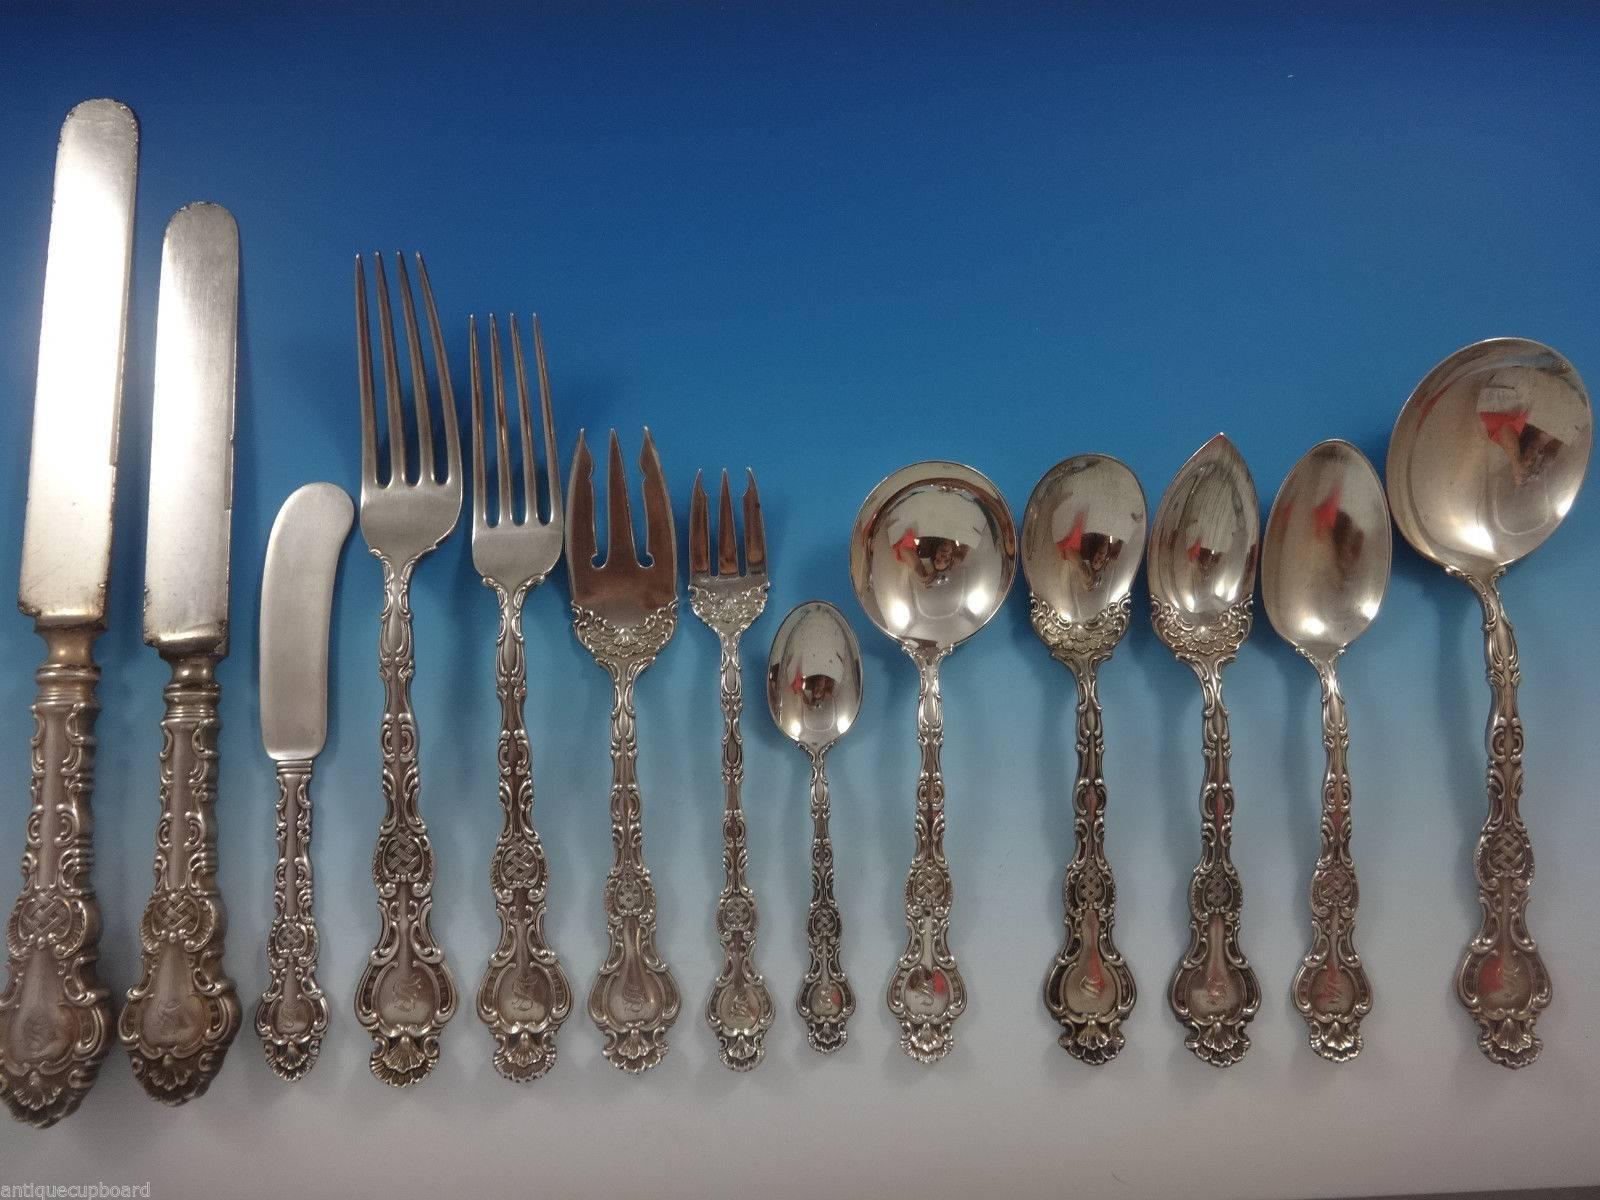 Huge rare regent by Durgin sterling silver dinner and luncheon flatware set of 161 pieces. This is an exceedingly rare pattern with unusual pierced handle and beautiful servers. Many of the serving pieces have bright-cut ribbons on the shoulders.